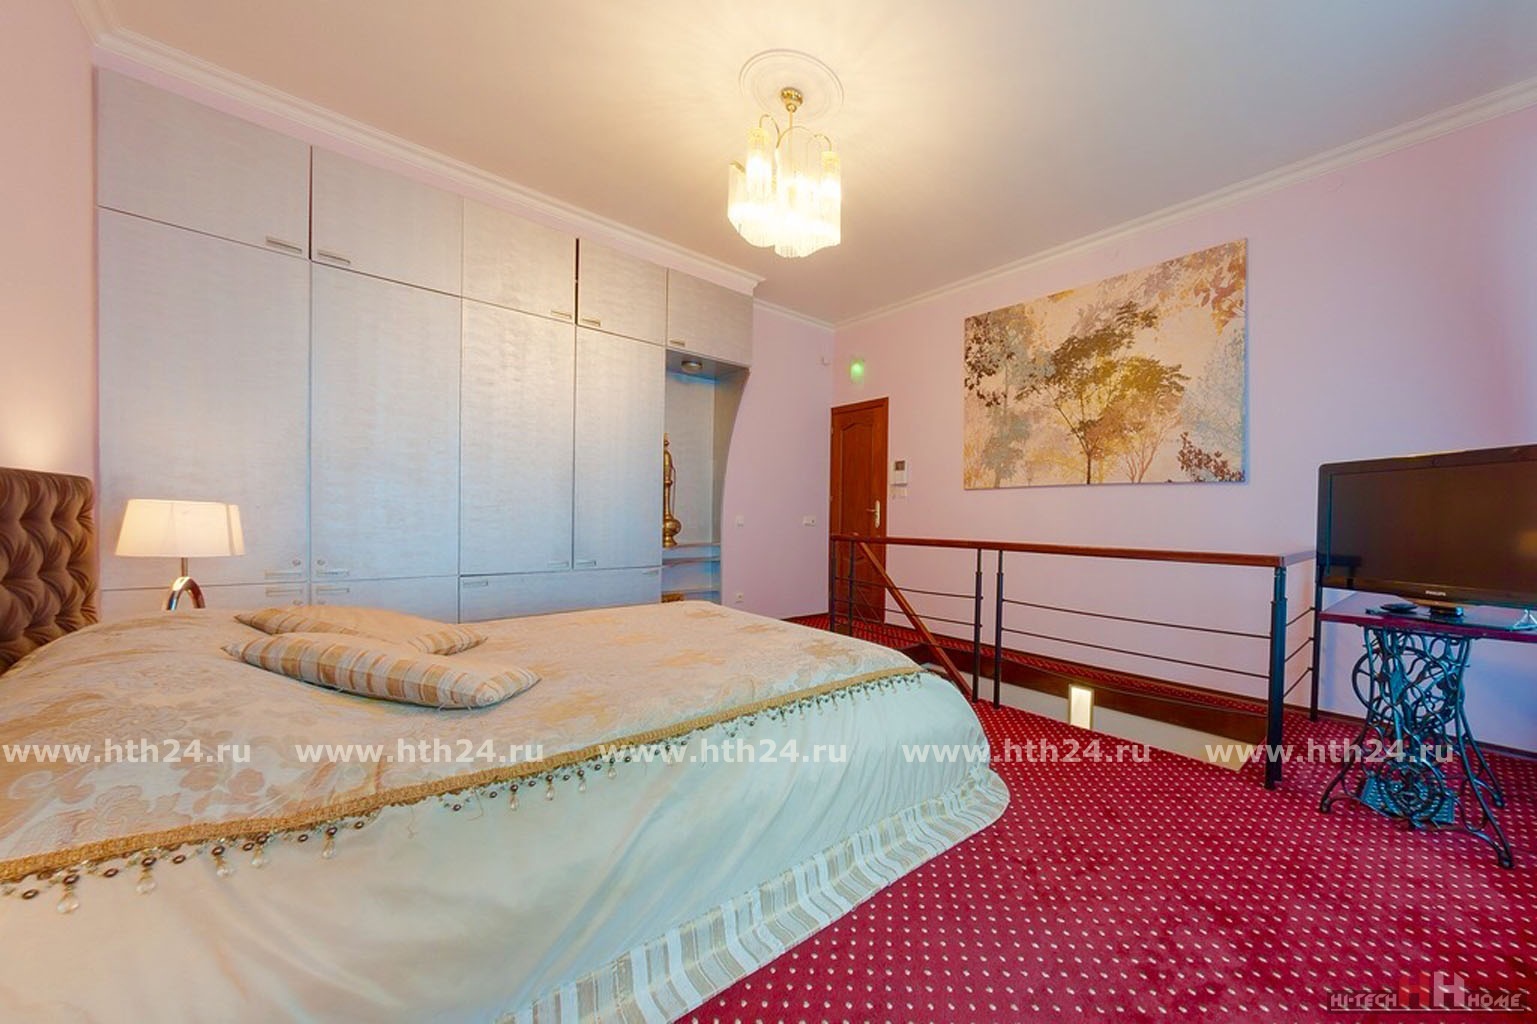 Two-level apartment for by day rent in SPb at Italyanskaya street 29